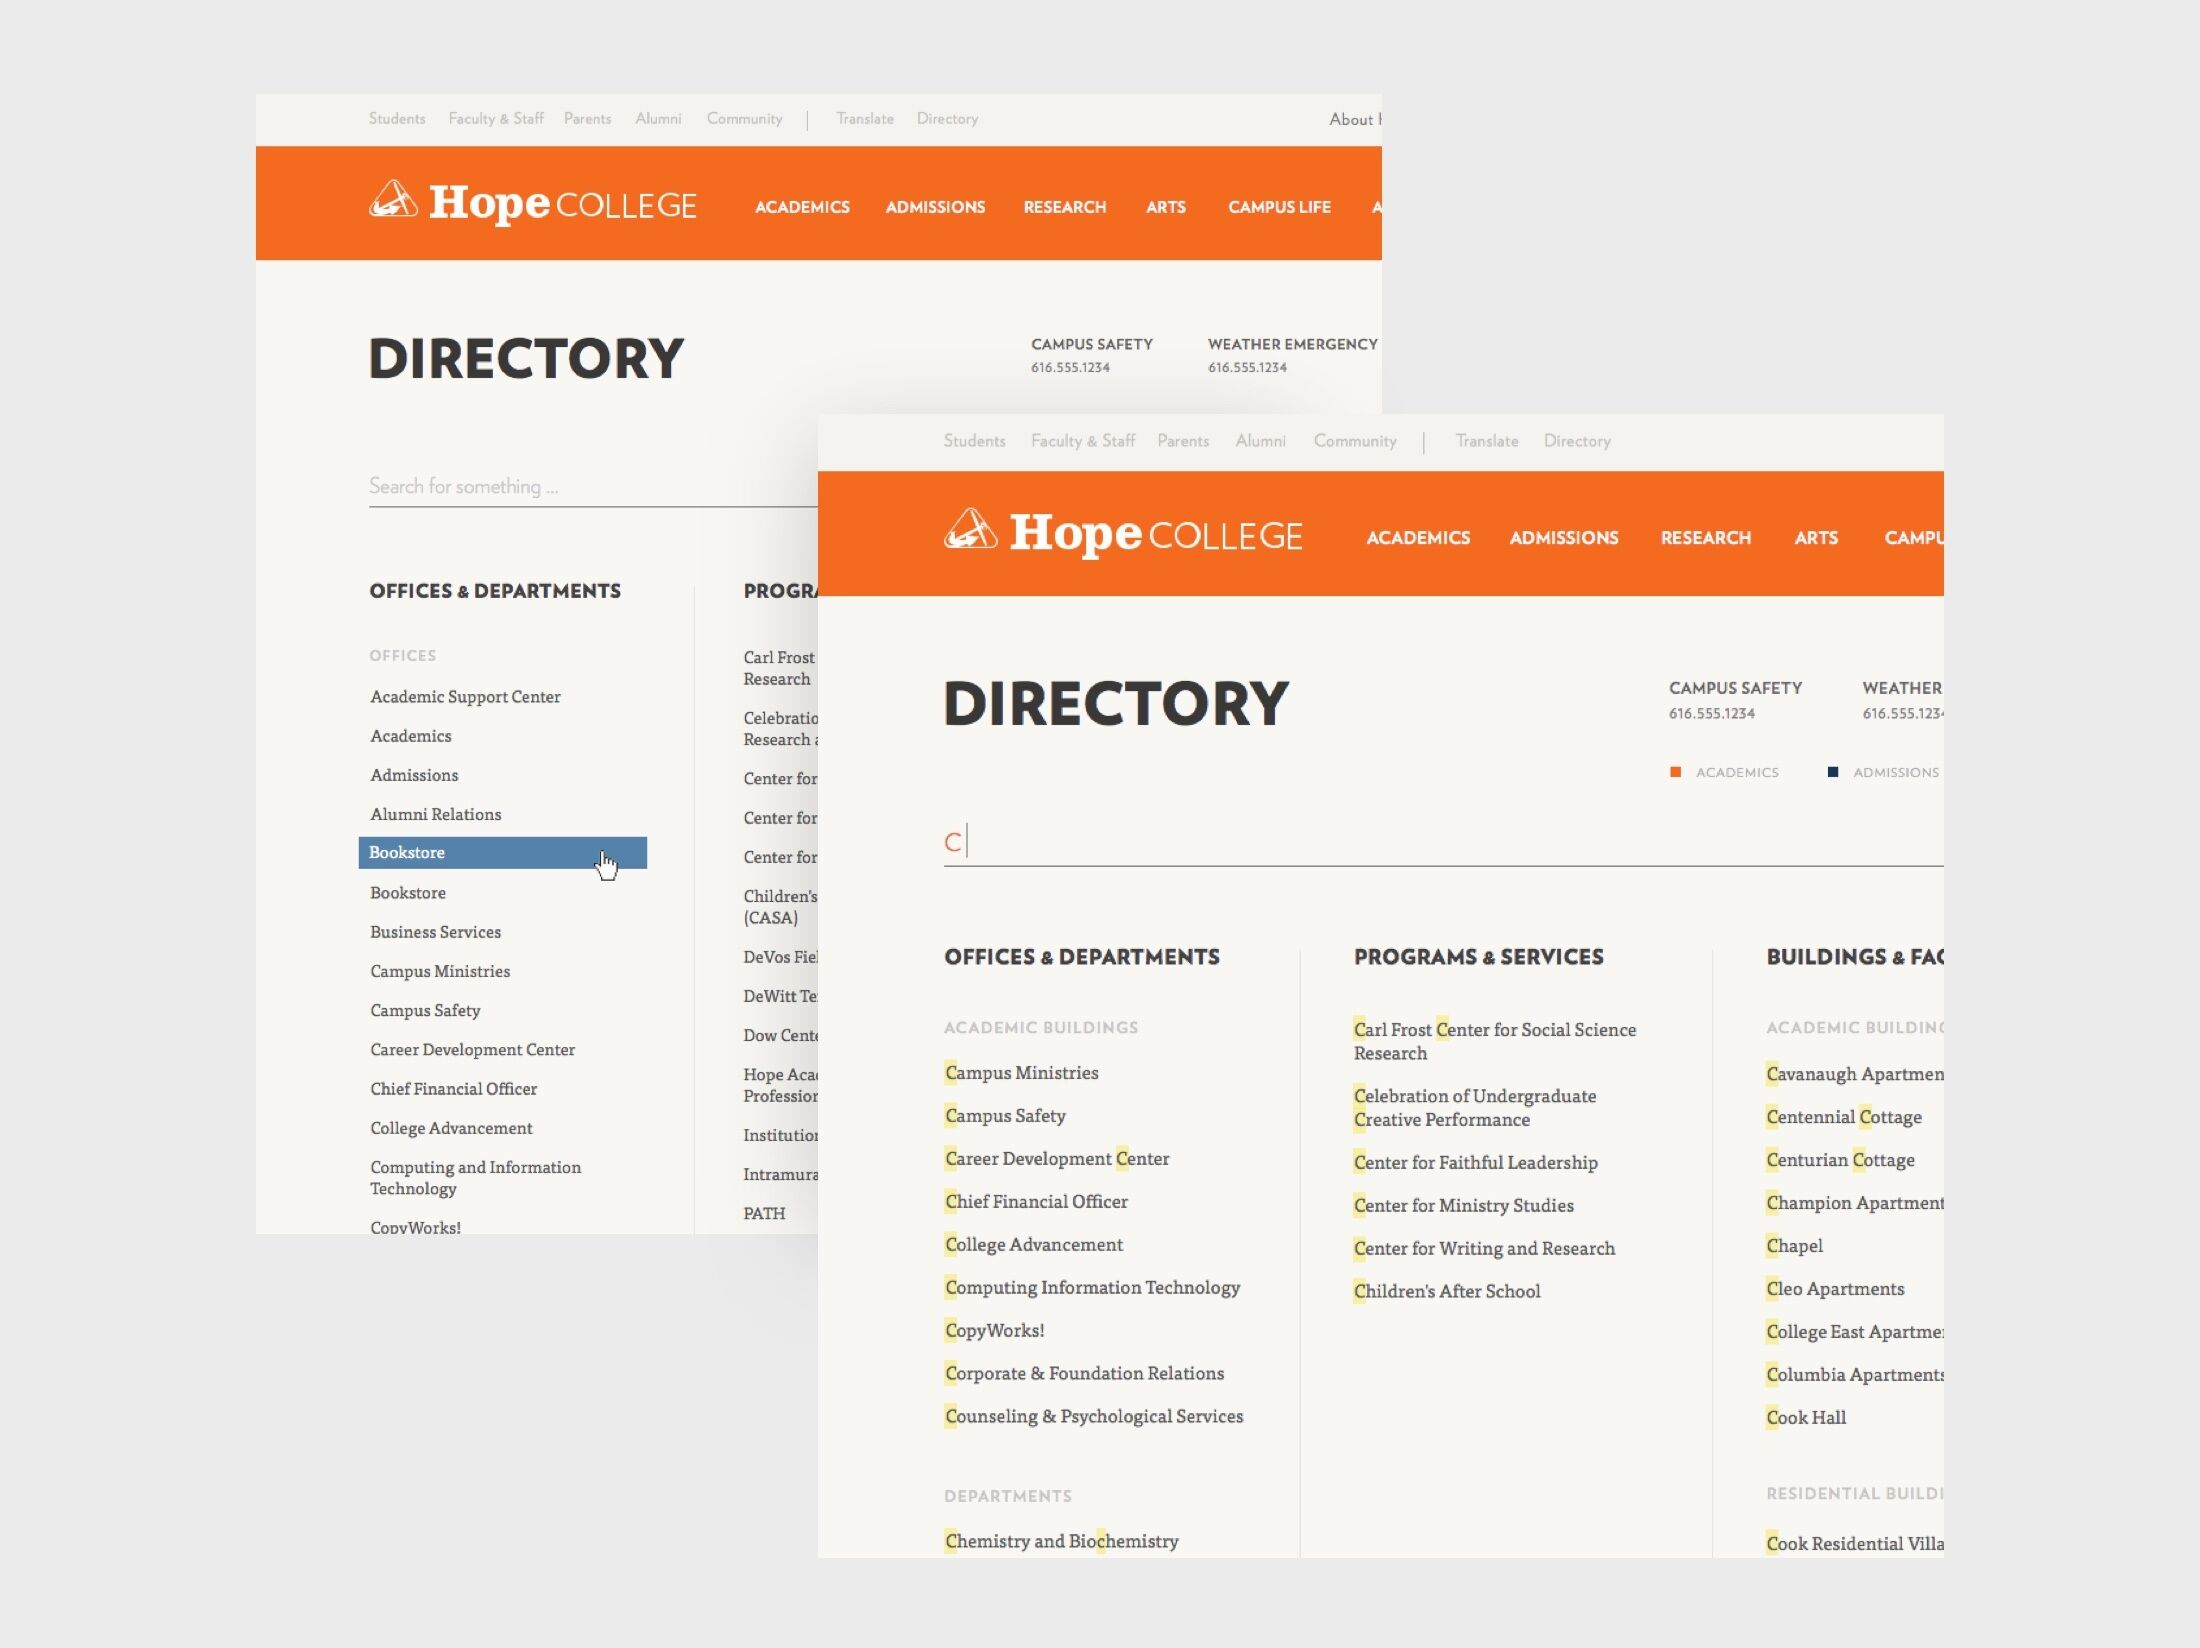 Screenshot of the searchable directory